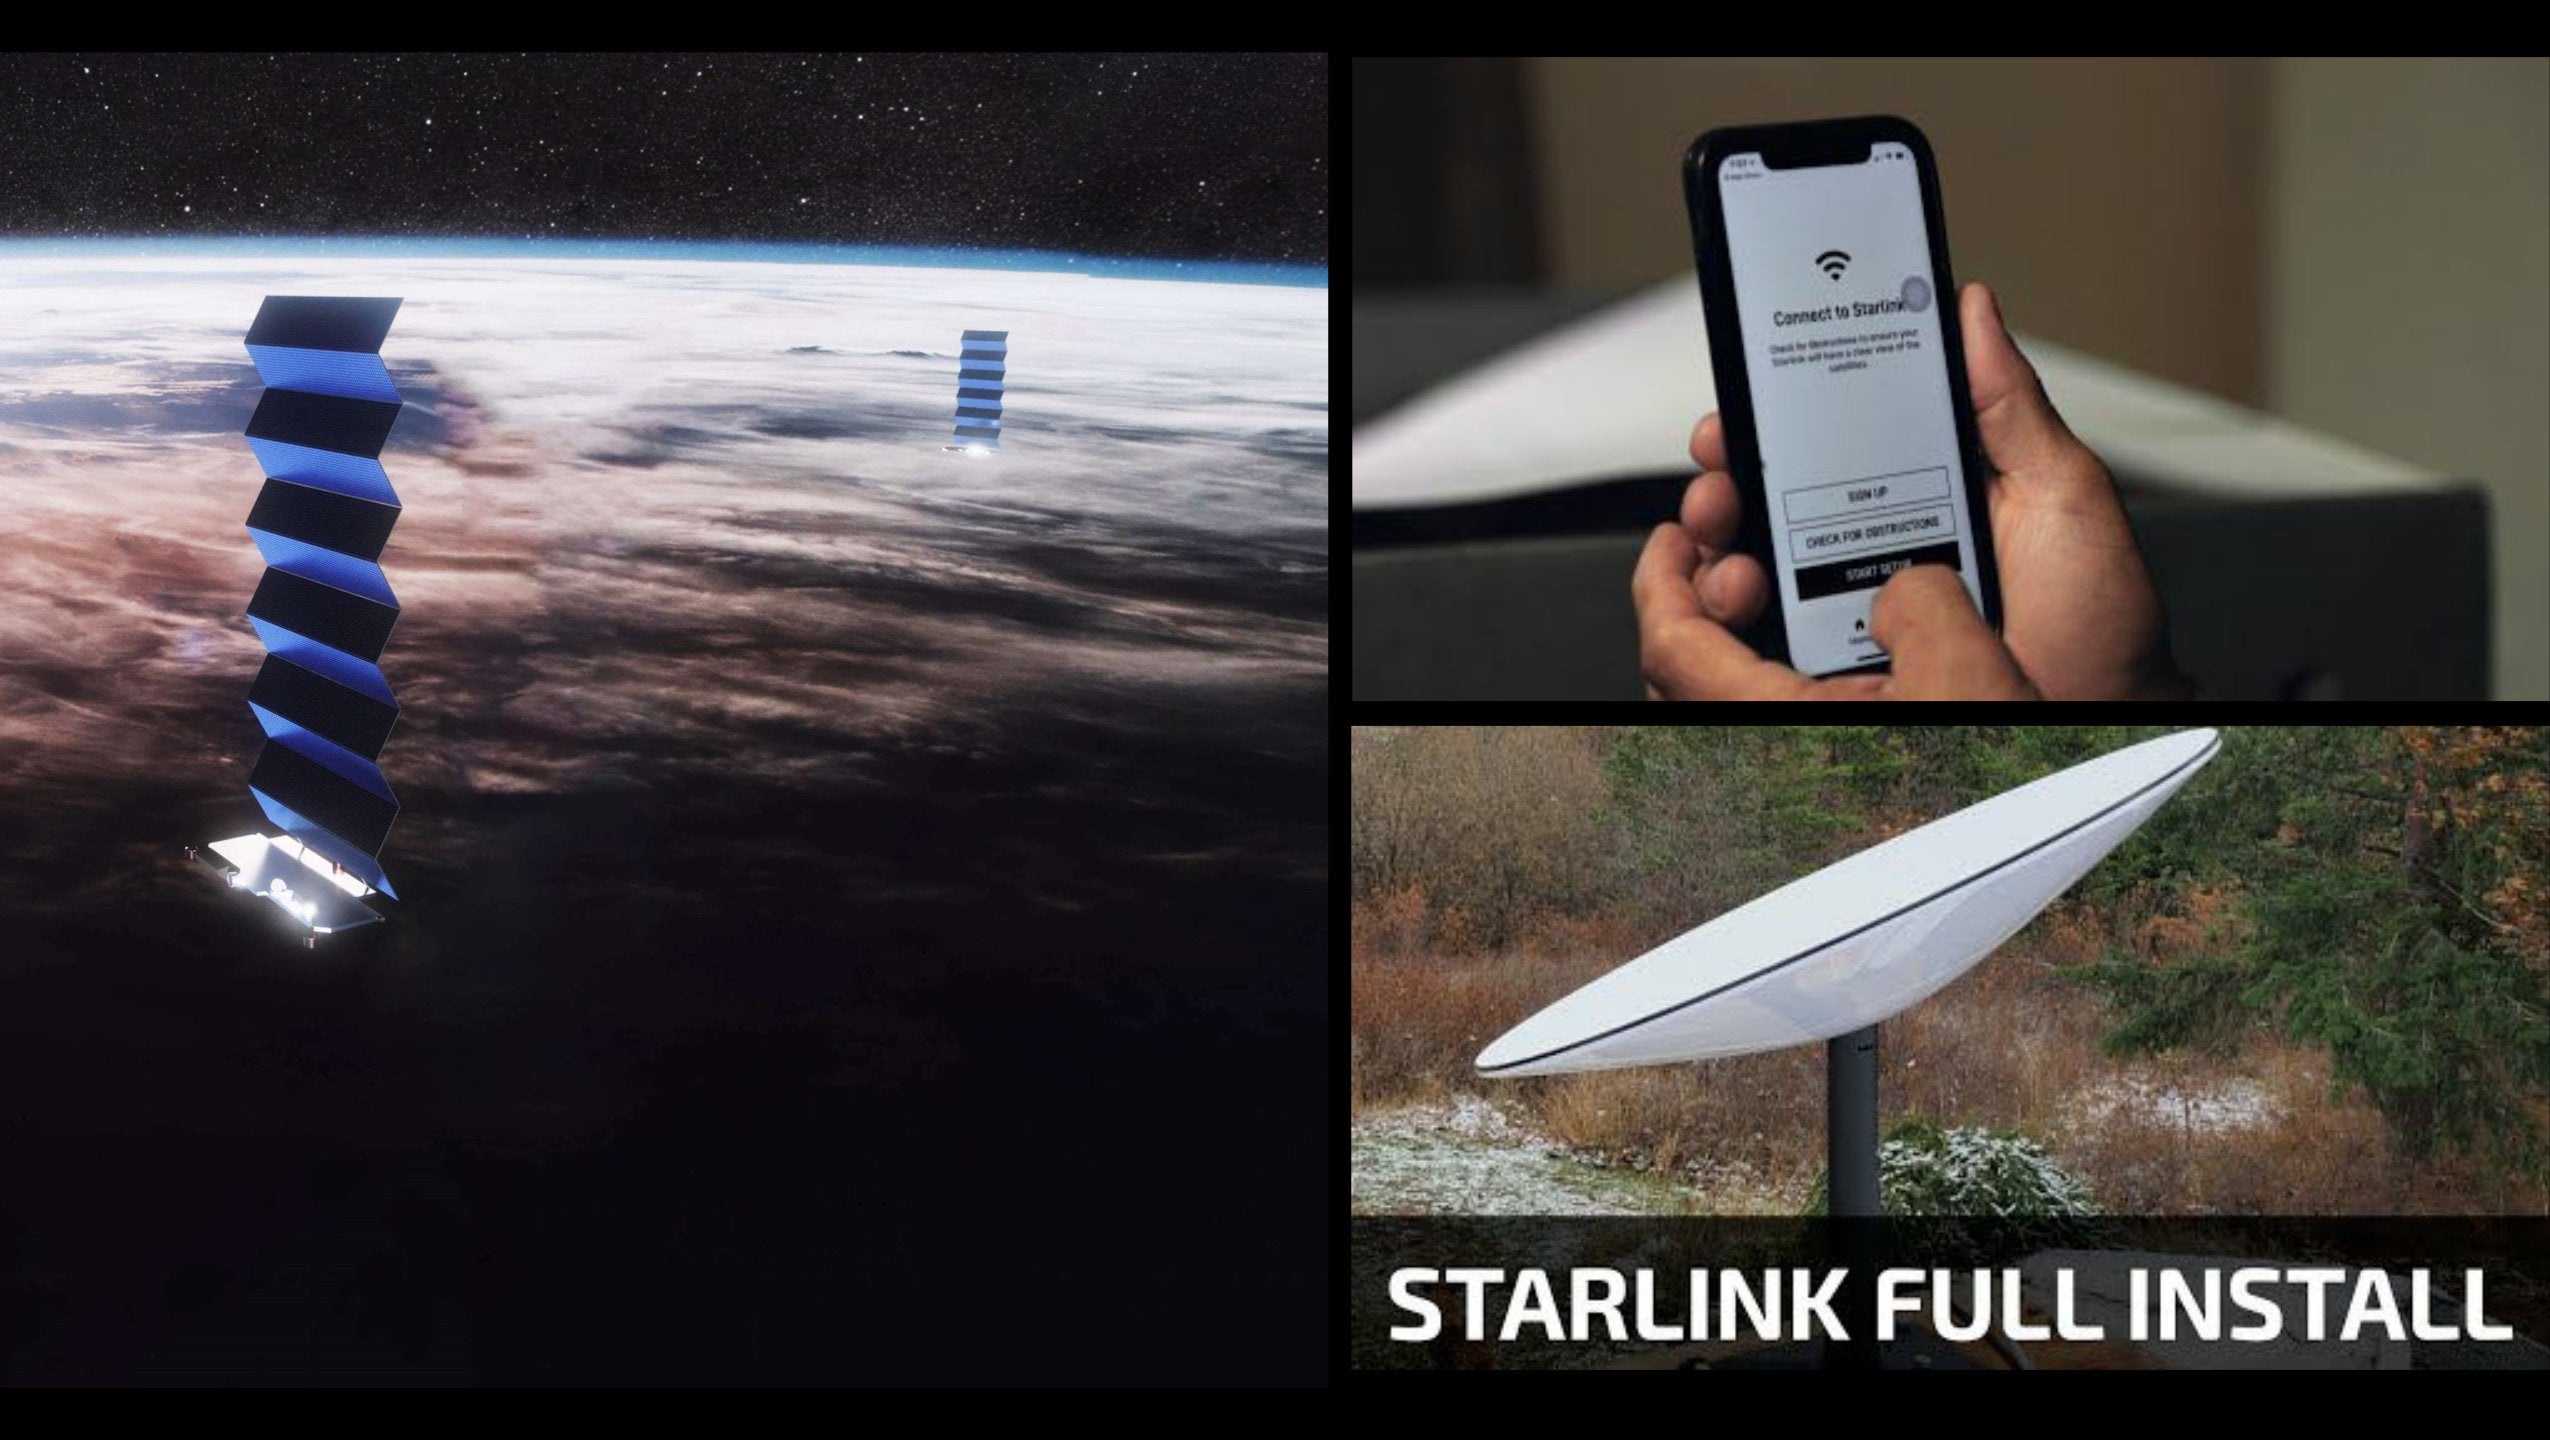 SpaceX Starlink Beta customers demonstrate how easy the Internet network is to Setup [VIDEO]